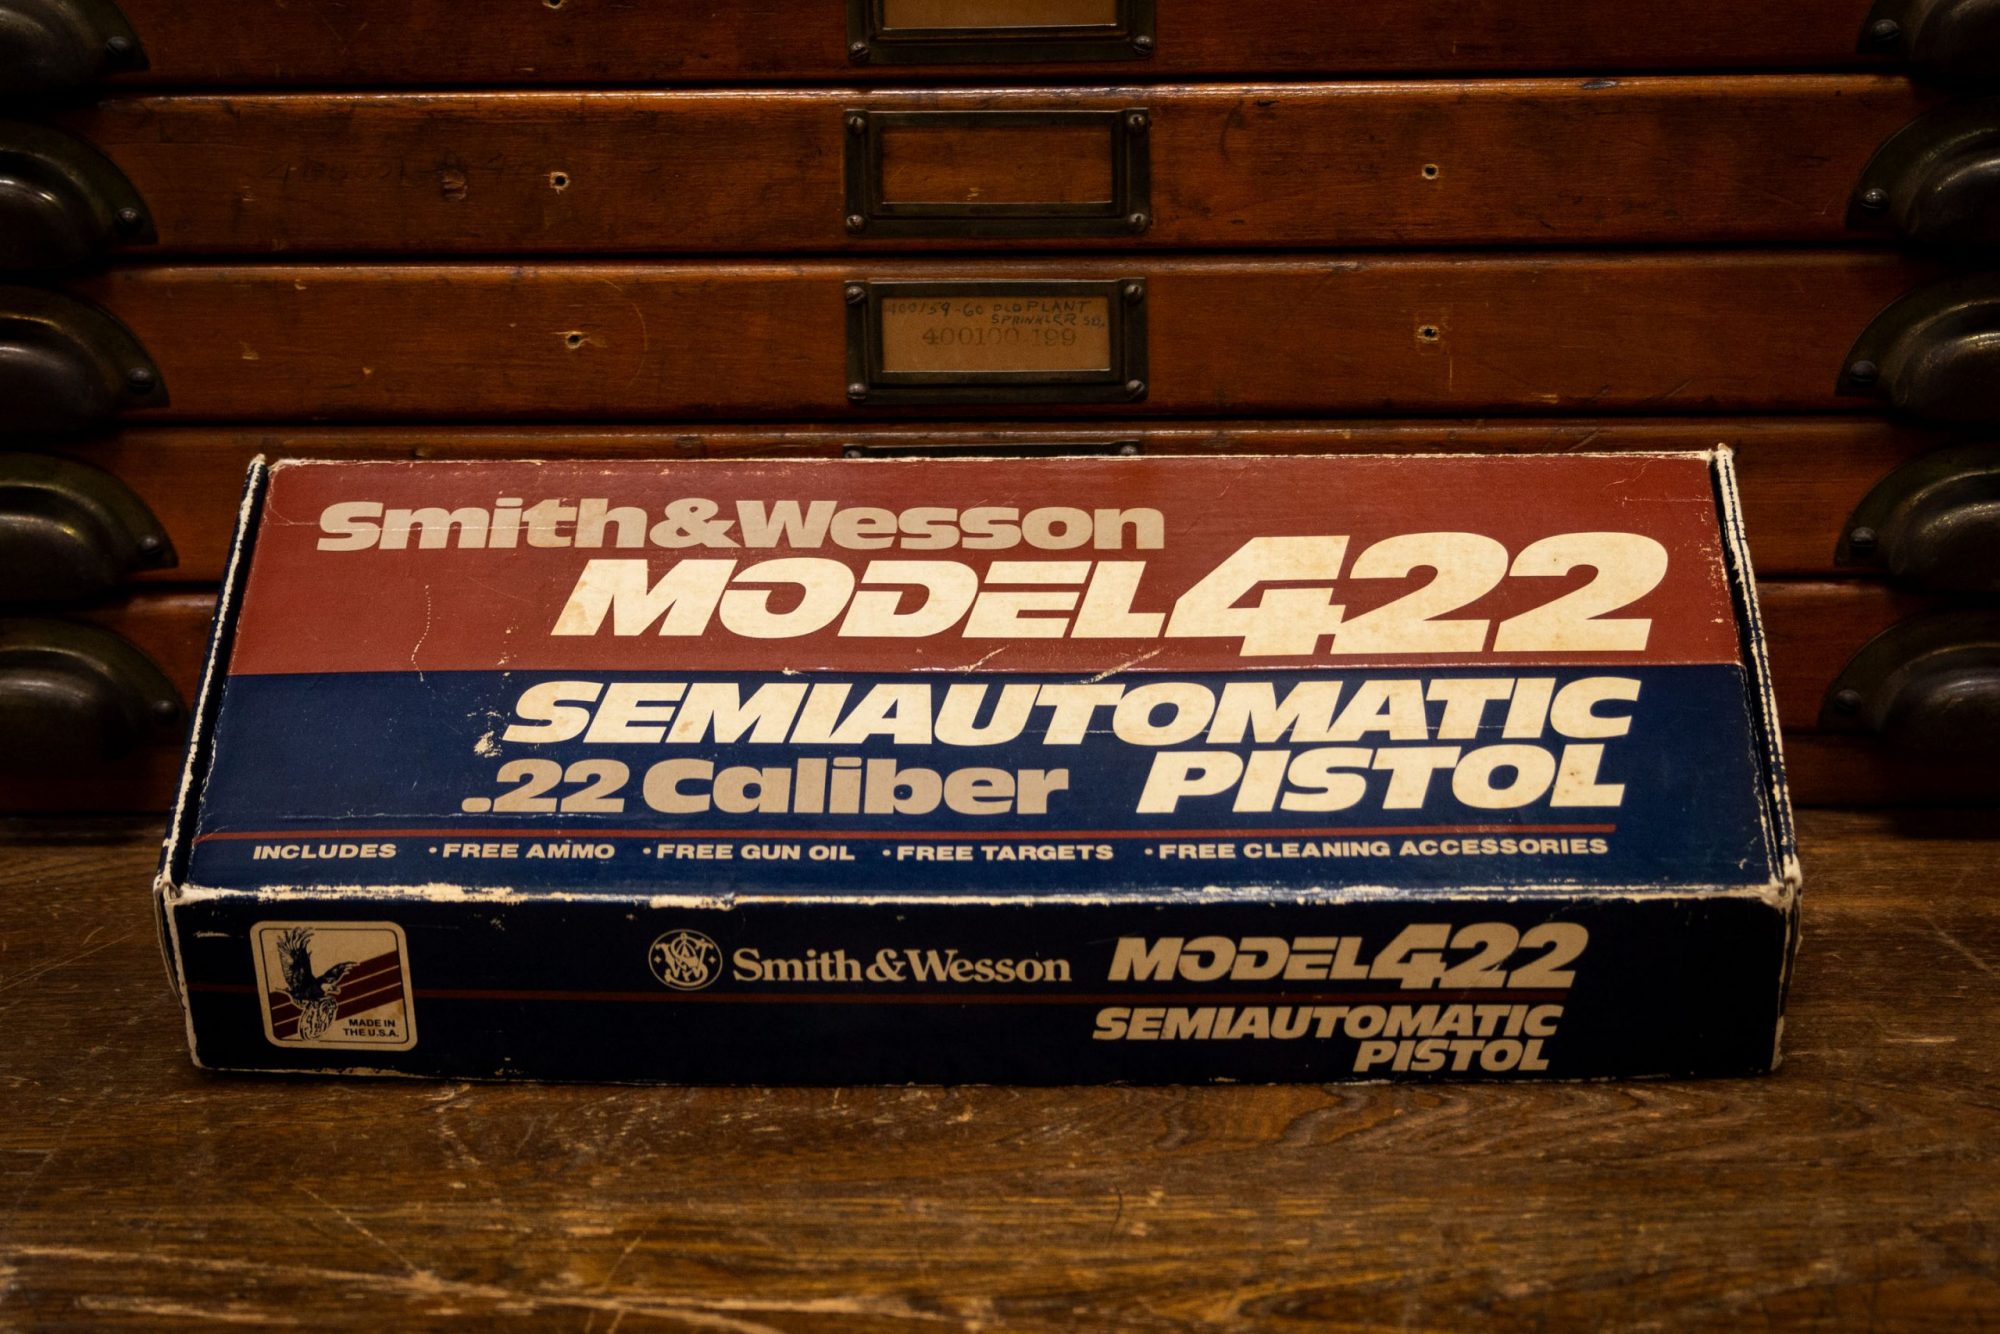 Photo of the original box for a pre-owned Smith & Wesson Model 422, for sale by Turnbull Restoration of Bloomfield, NY